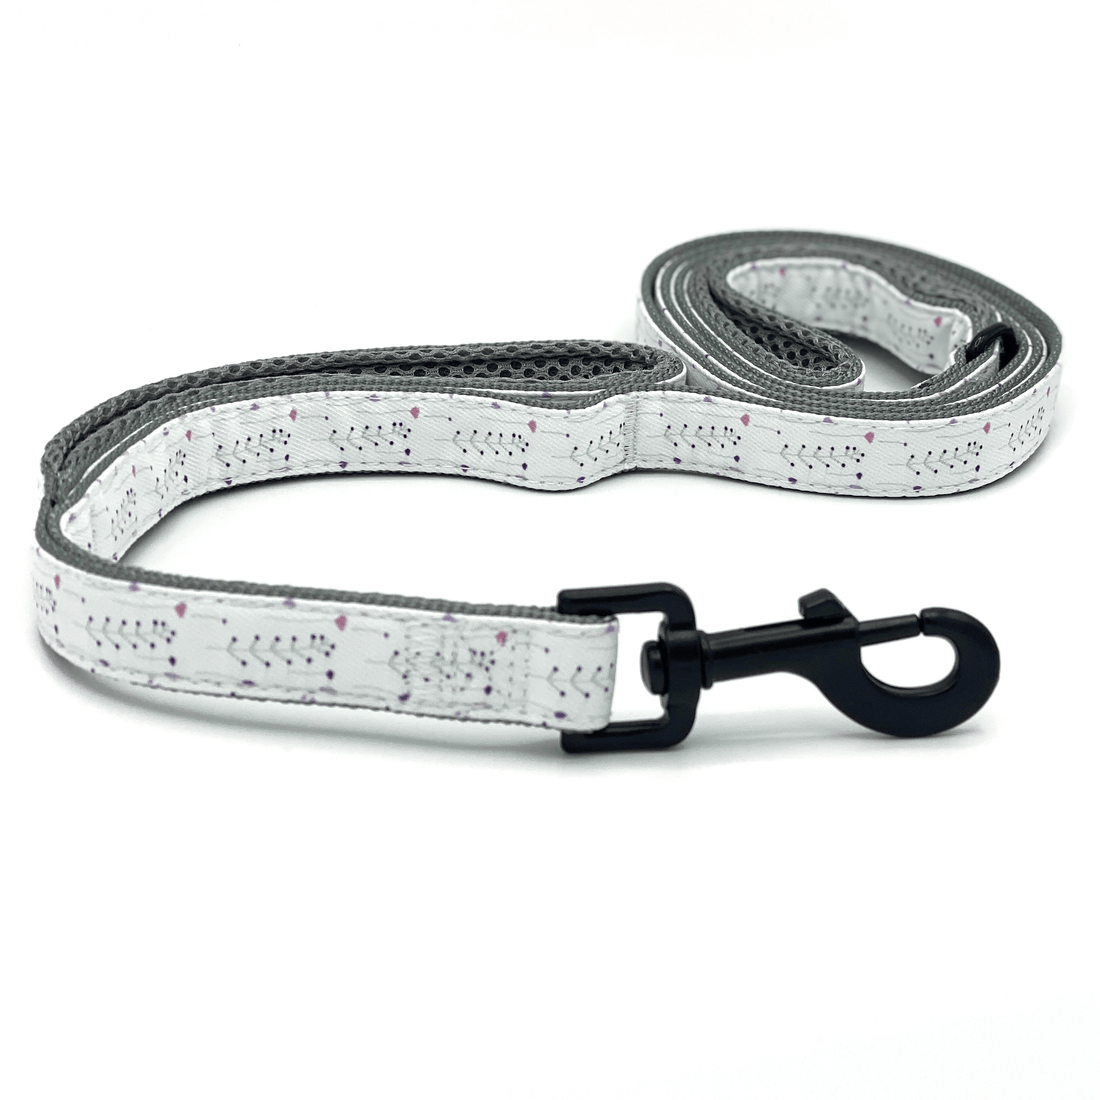 a wildflower patterned leash with single stem flowers